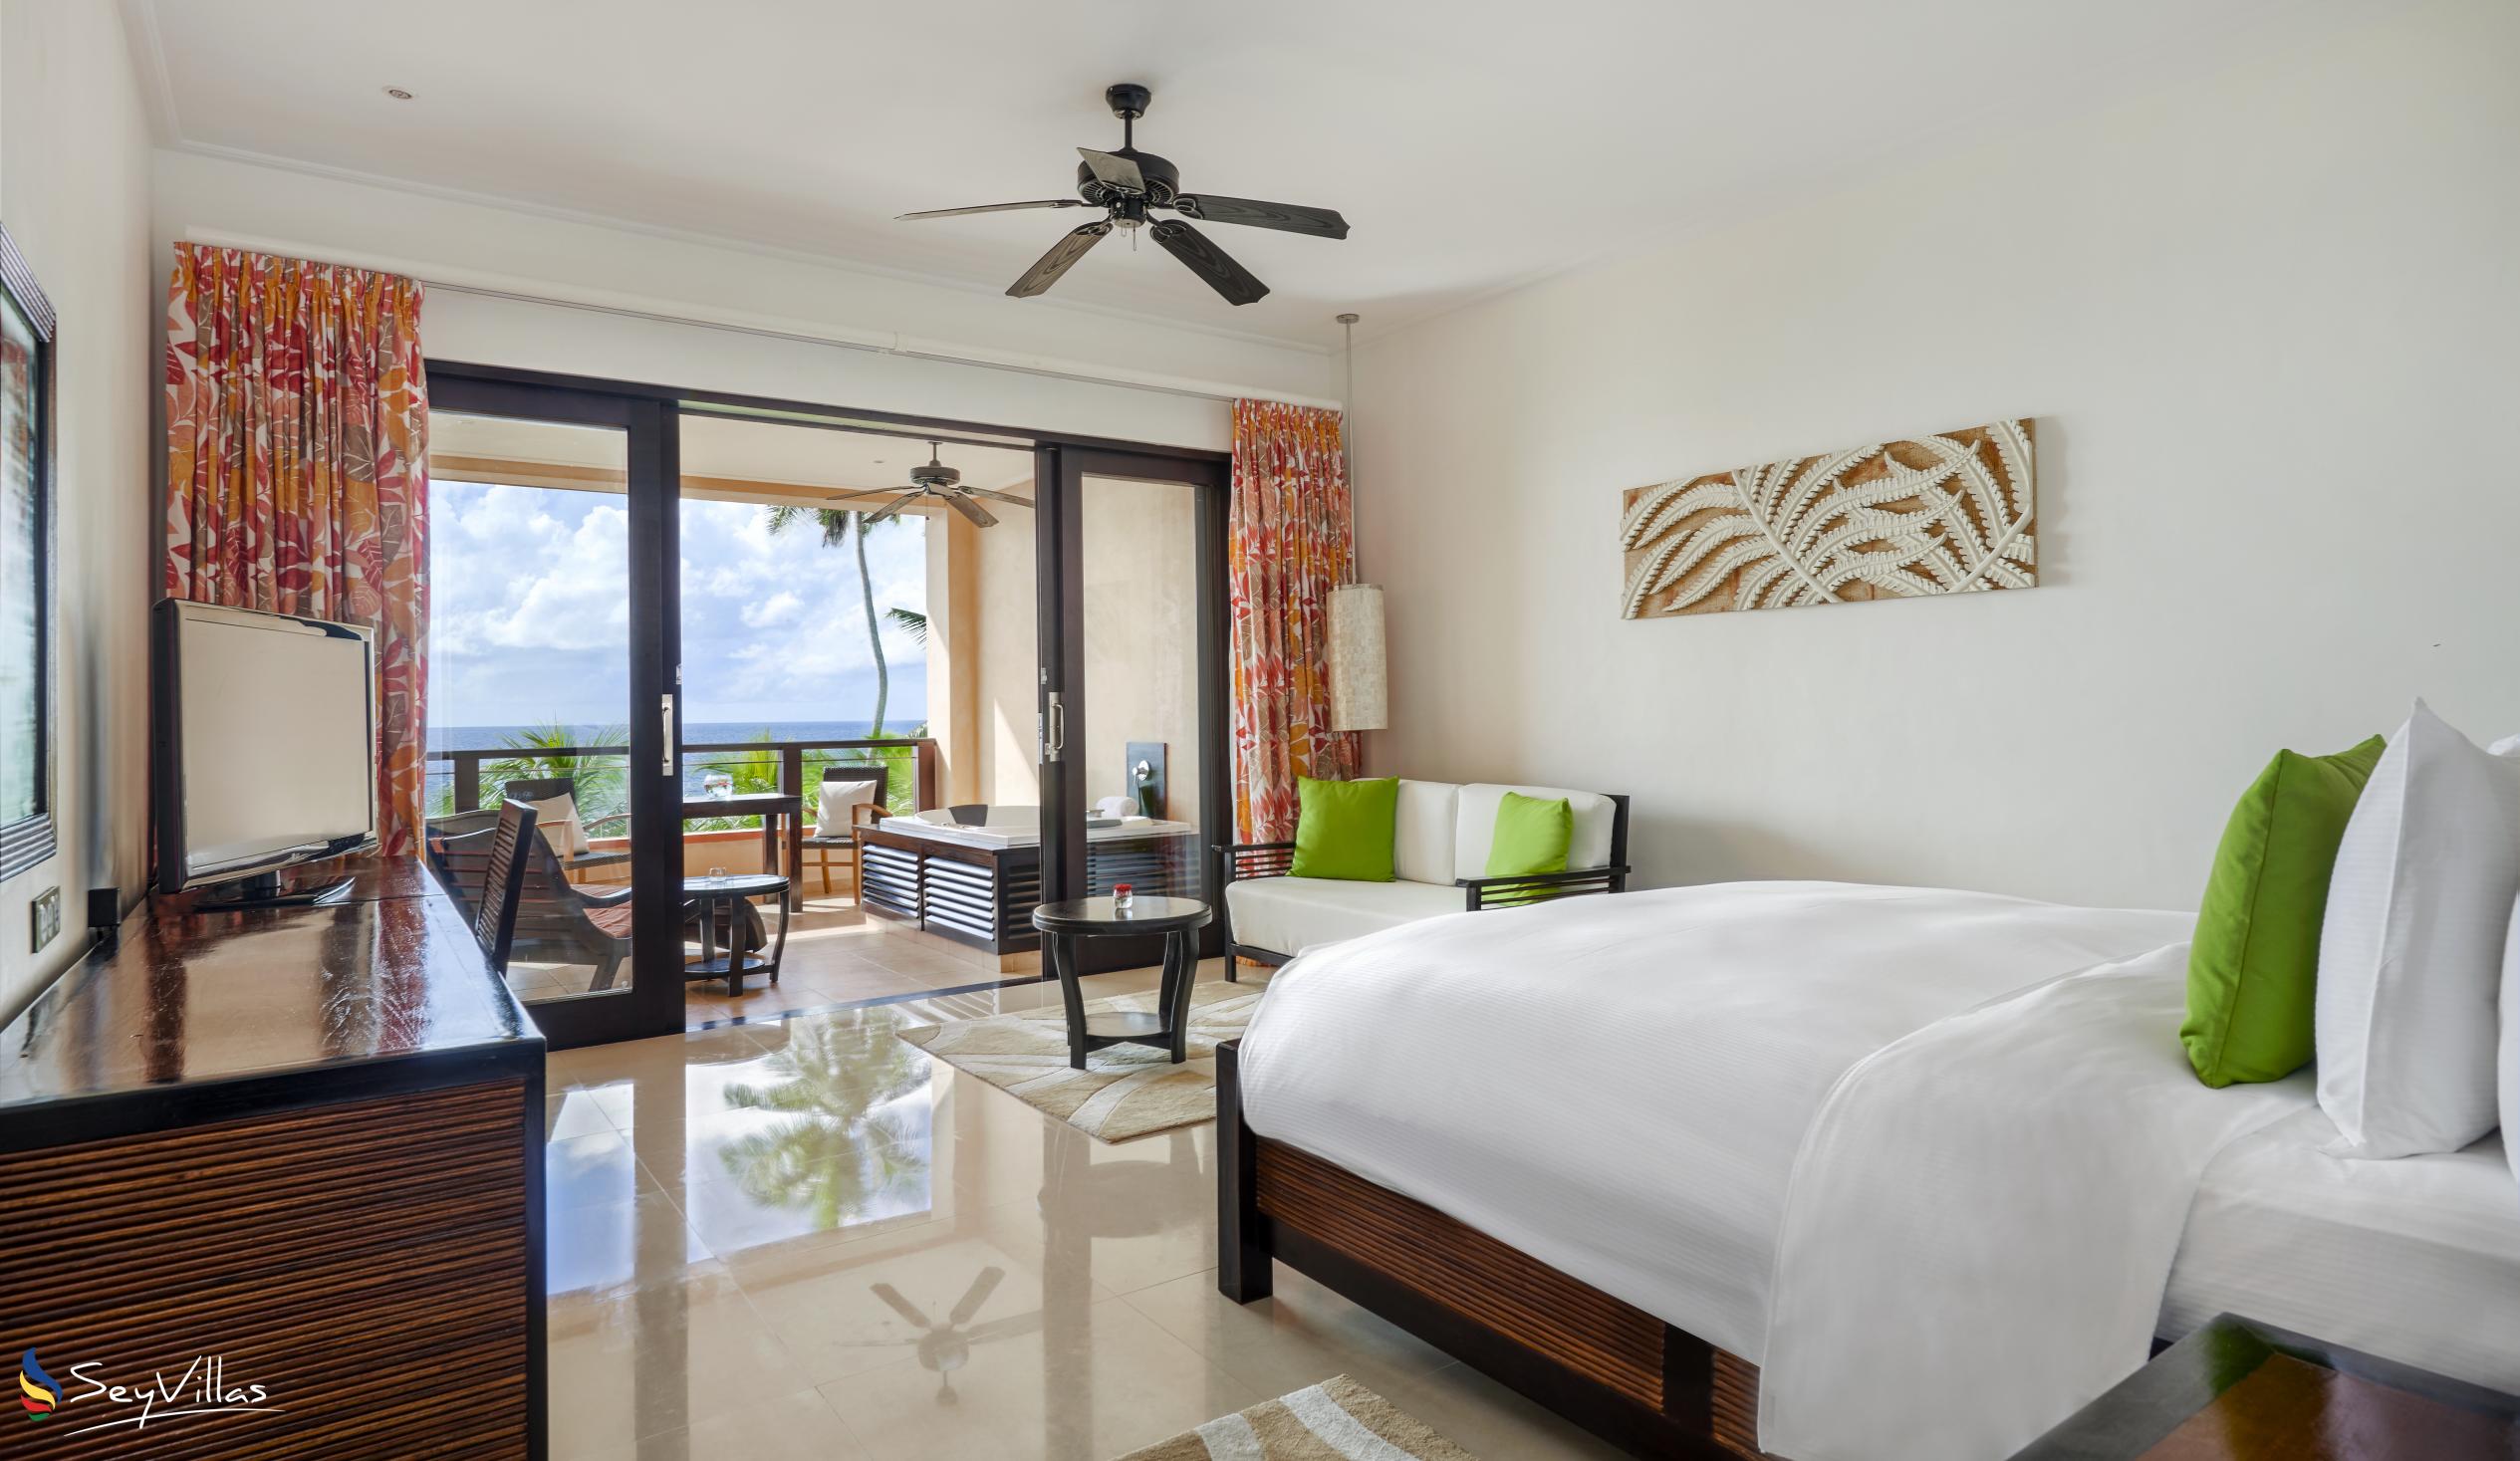 Foto 71: Double Tree by Hilton - Allamanda Resort & Spa - King Premium Room with Ocean View with Jacuzzi - Mahé (Seychellen)